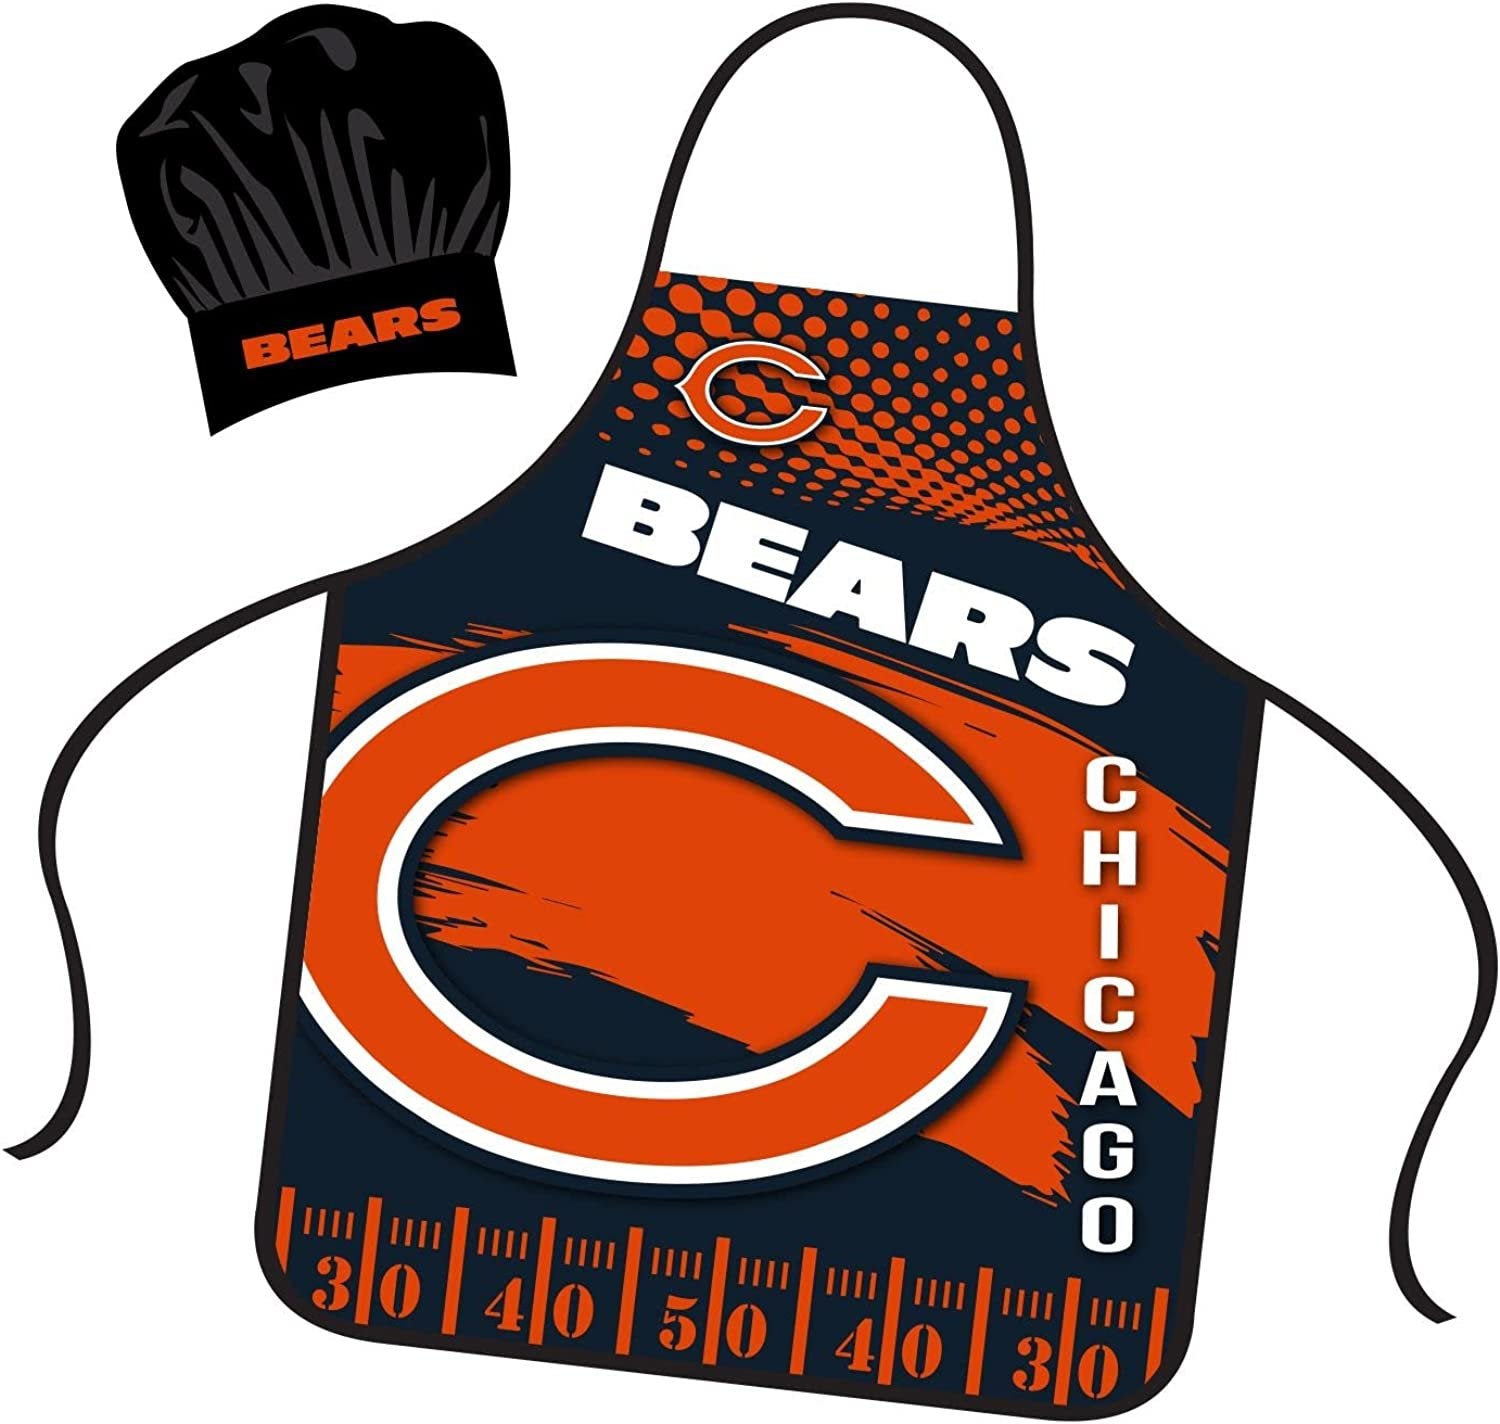 Chicago Bears Apron Chef Hat Set Full Color Universal Size Tie Back Grilling Tailgate BBQ Cooking Host